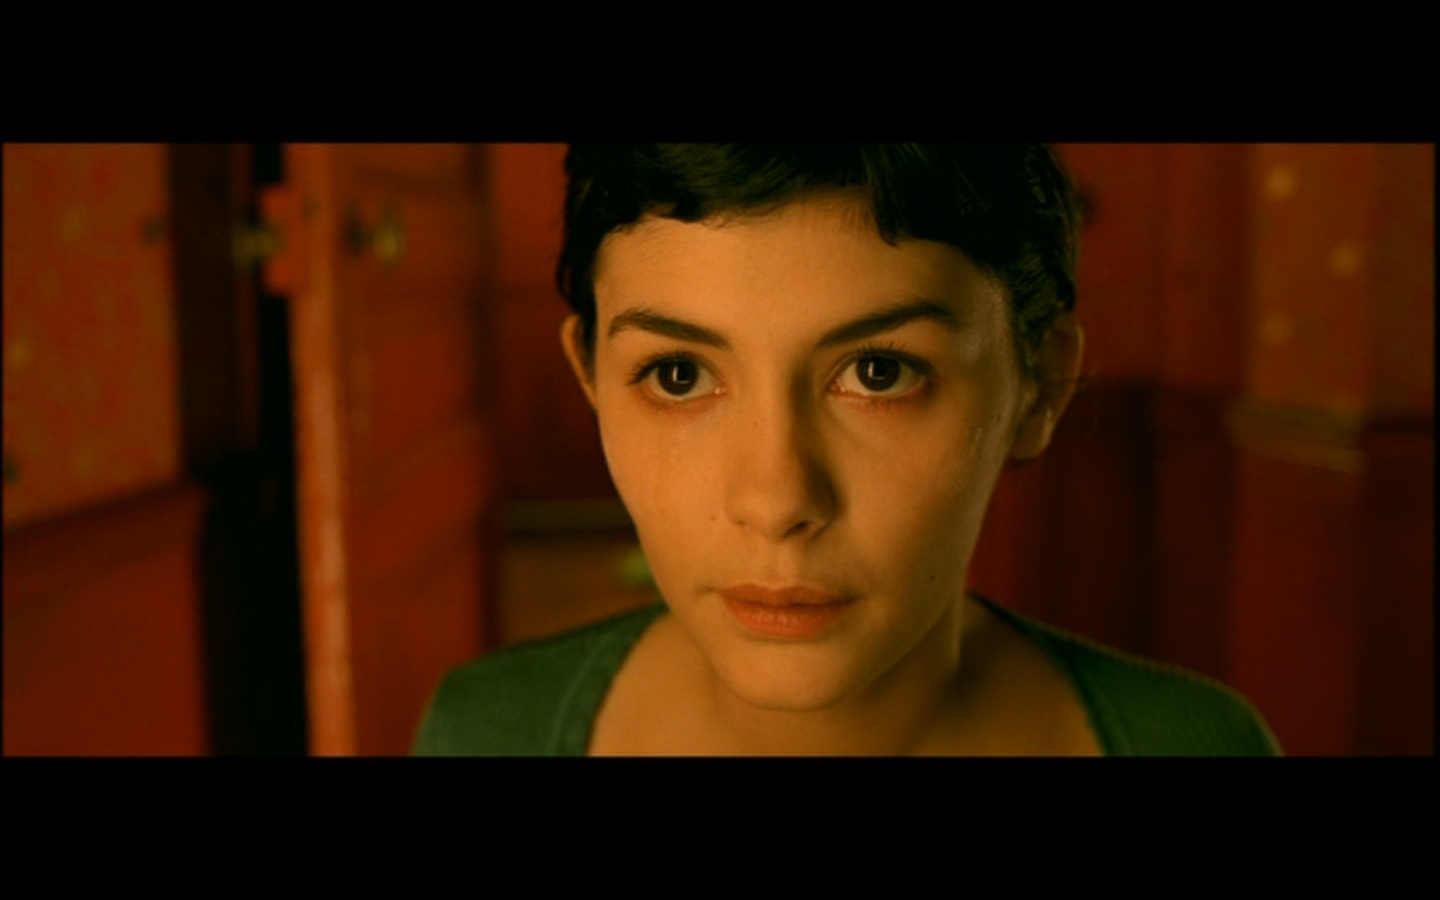 amelie wallpaper,face,hair,nose,eyebrow,forehead